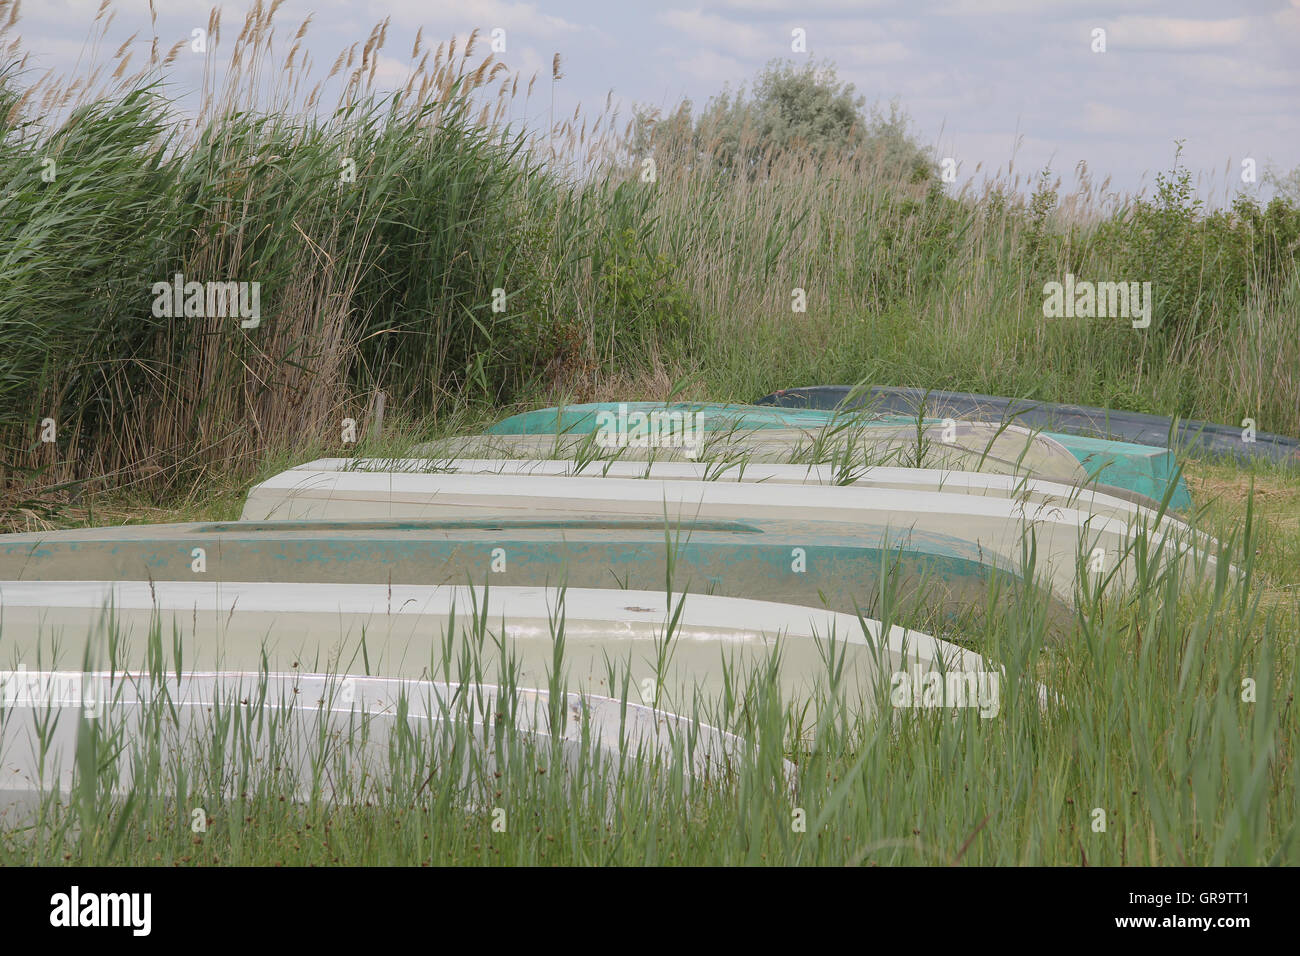 Boats In The Reeds At Lake Neusiedl, Austria Stock Photo